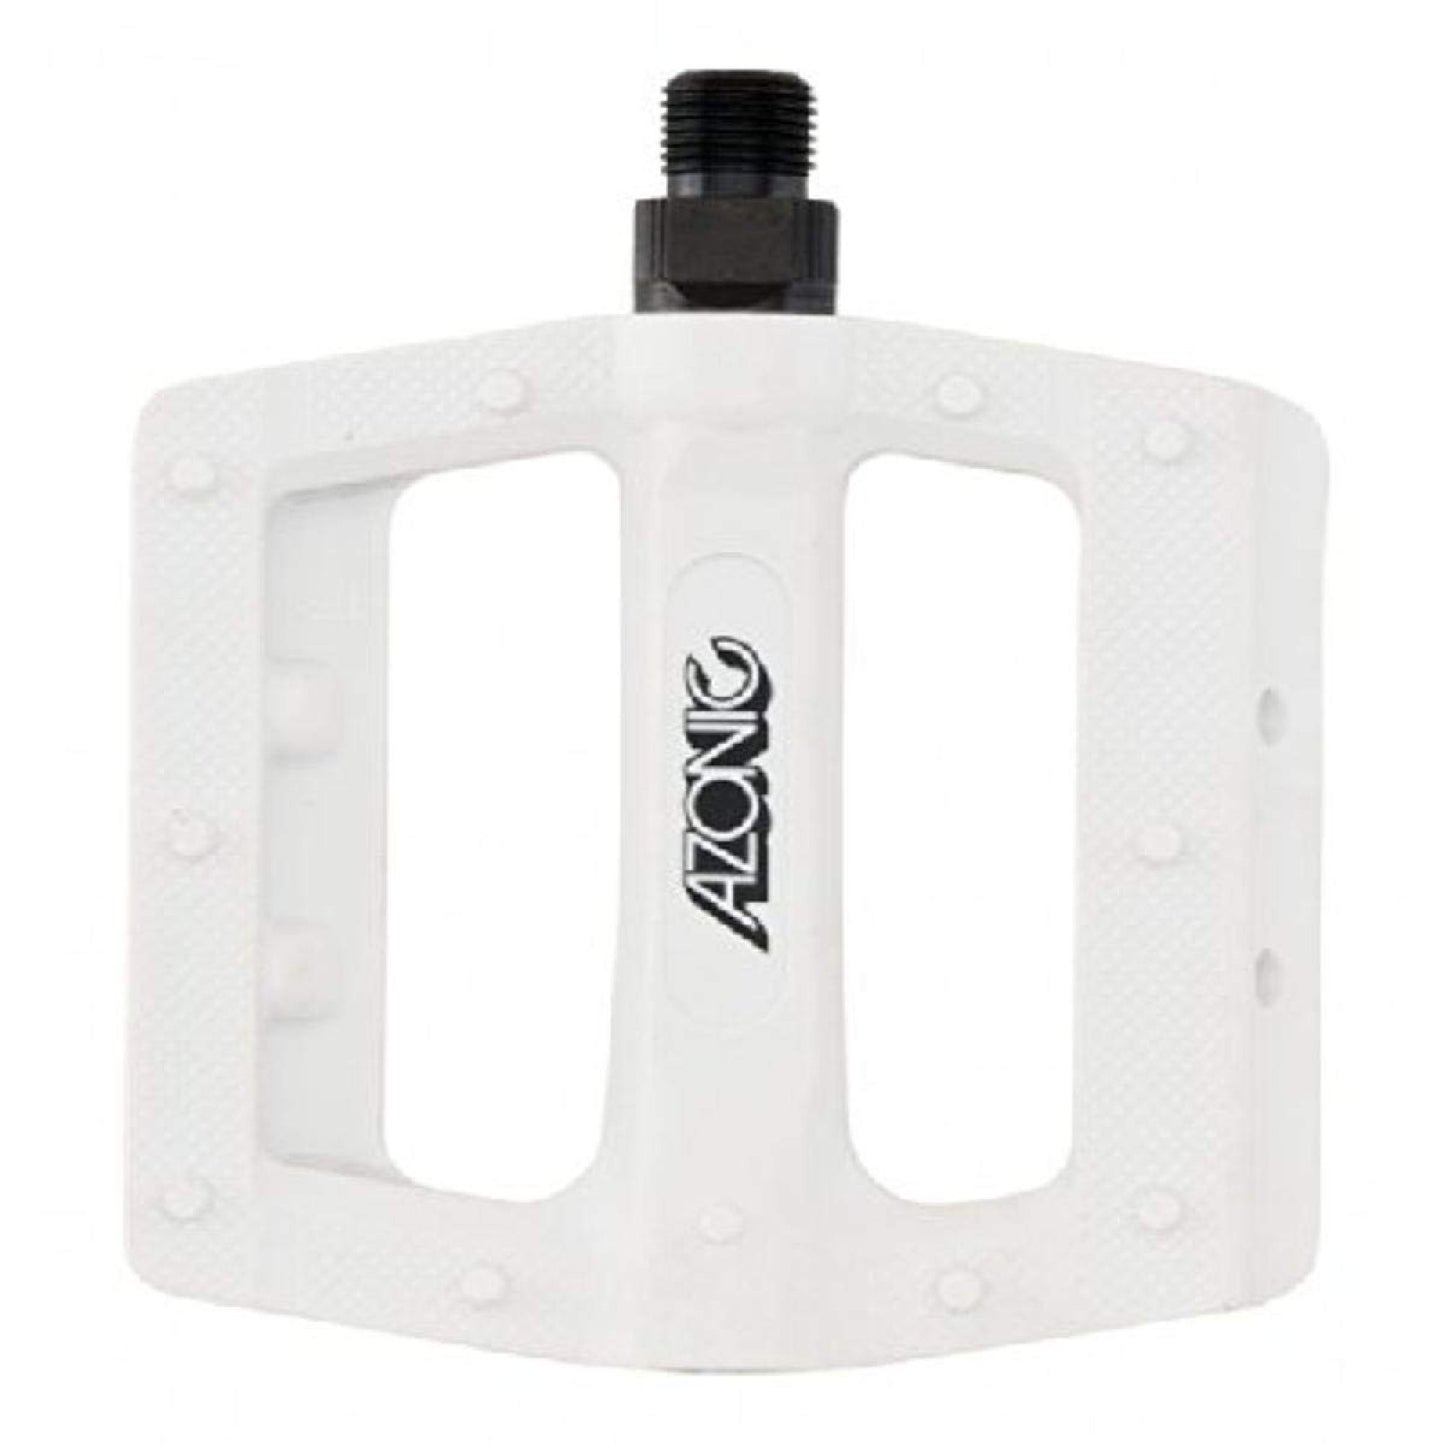 Azonic Shoo-In Pedal White OS Pedals